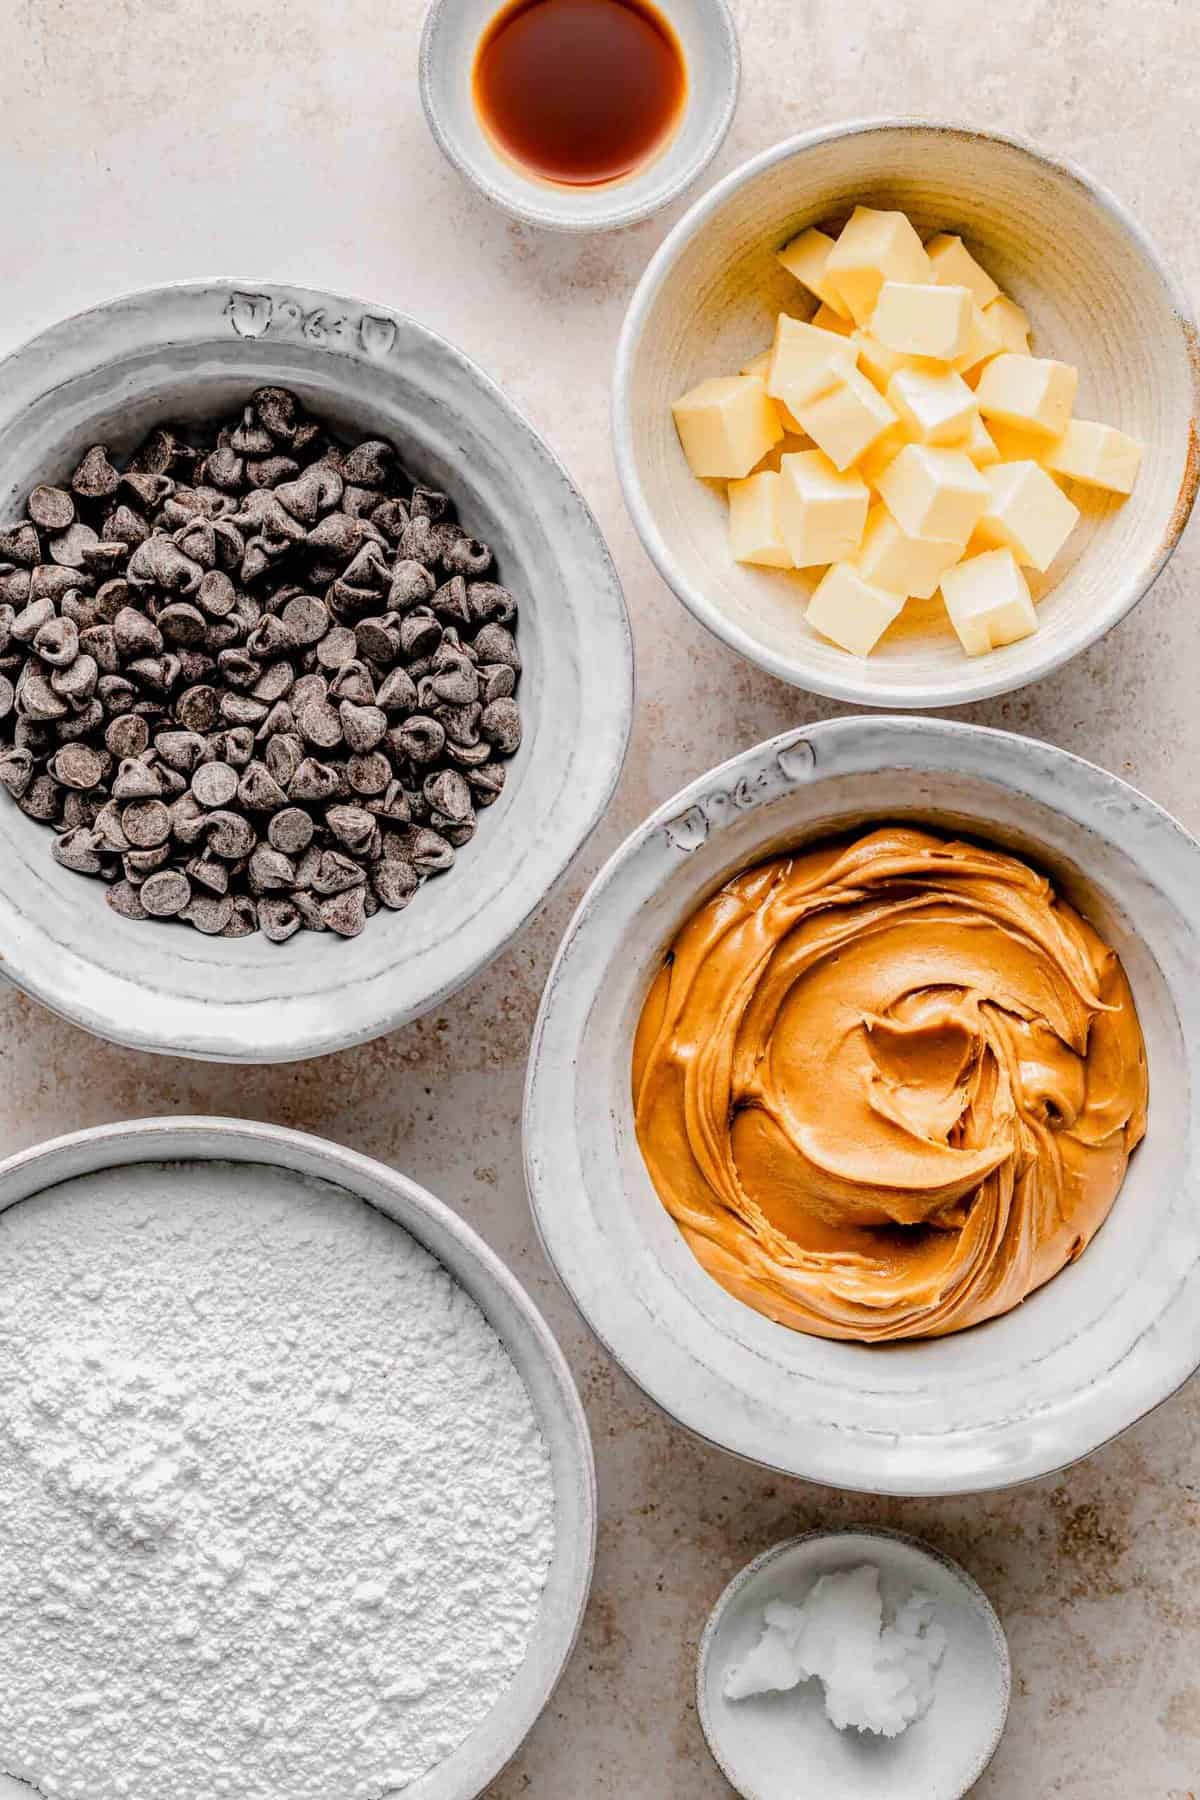 Ingredients for peanut butter balls.